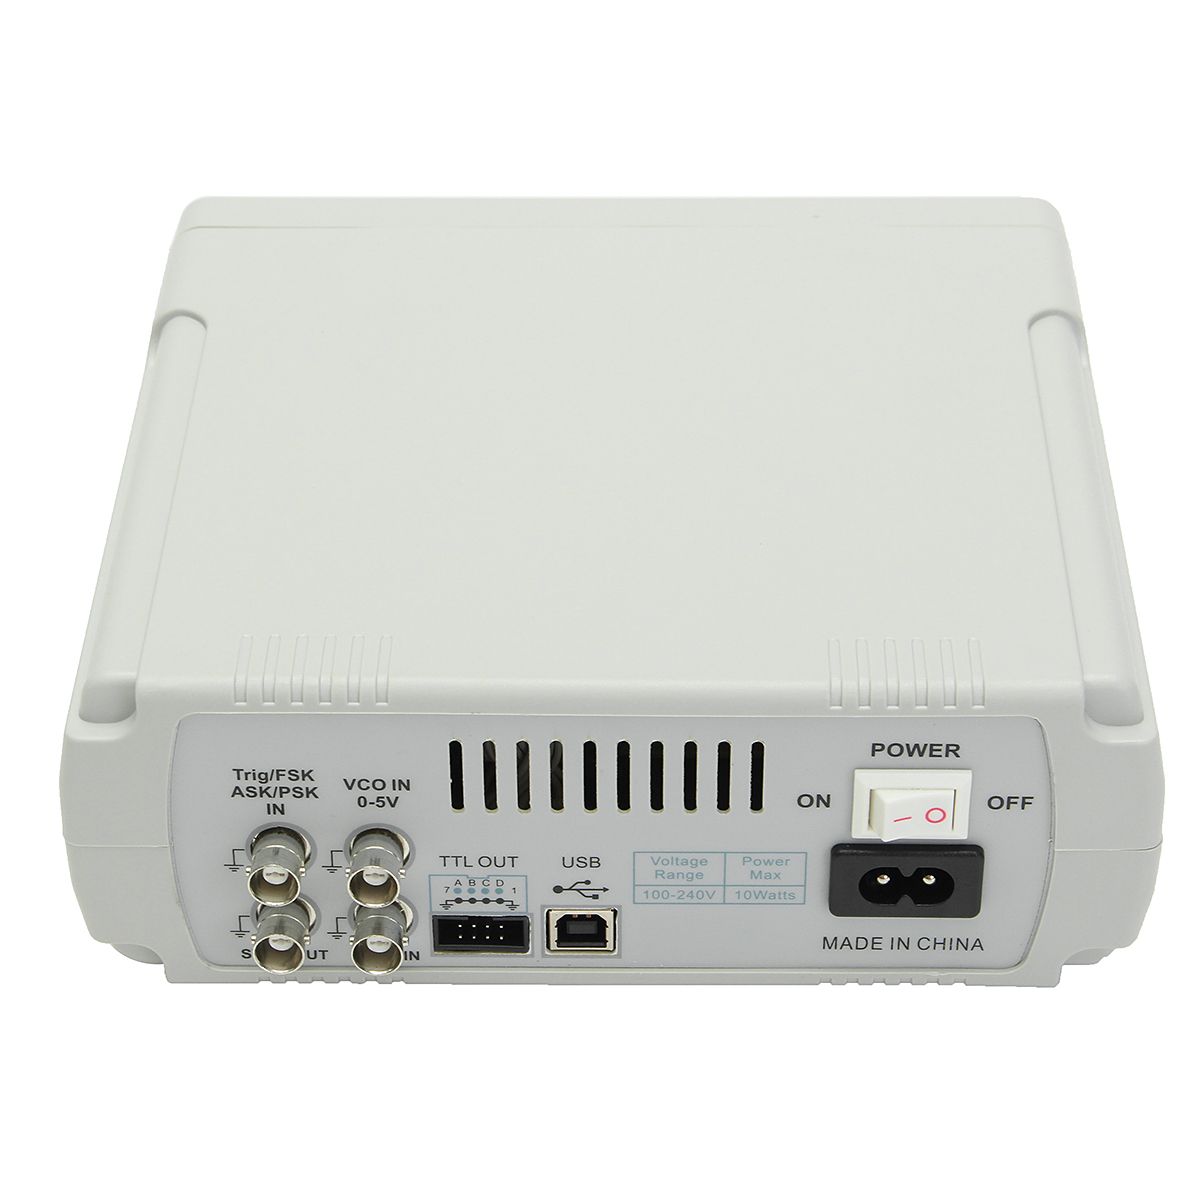 FY6600-Digital-12-60MHz-Dual-Channel-DDS-Function-Arbitrary-Waveform-Signal-Generator-Frequency-Mete-1171428